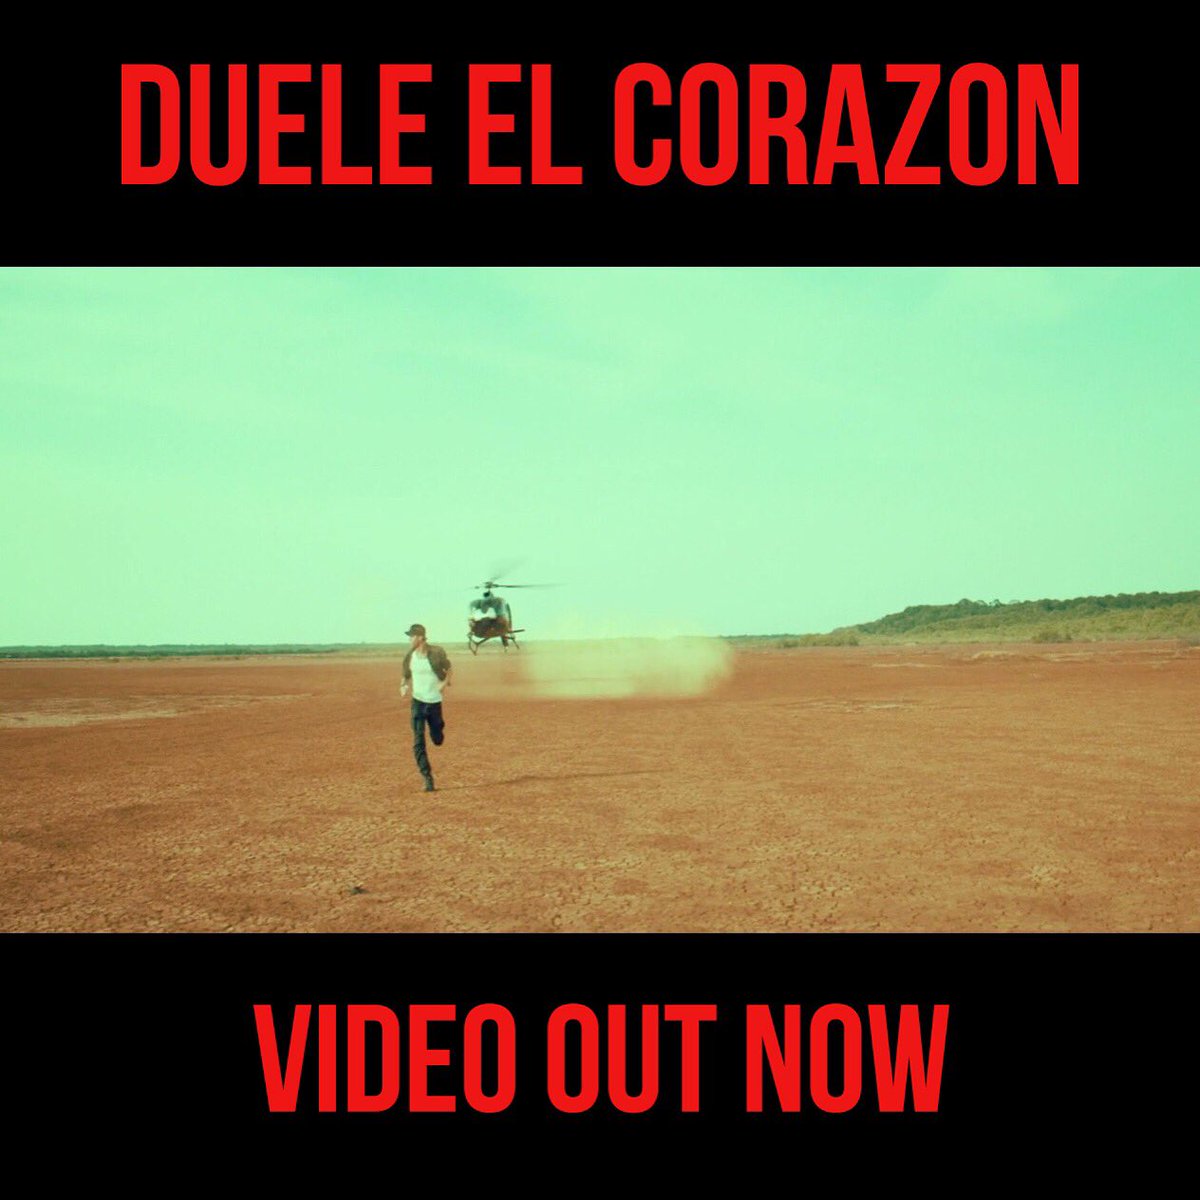 can't thank you guys enough for all the views and comments on the #DUELEELCORAZON #video!!!
https://t.co/l26r4S99pq https://t.co/9VstBokmu6